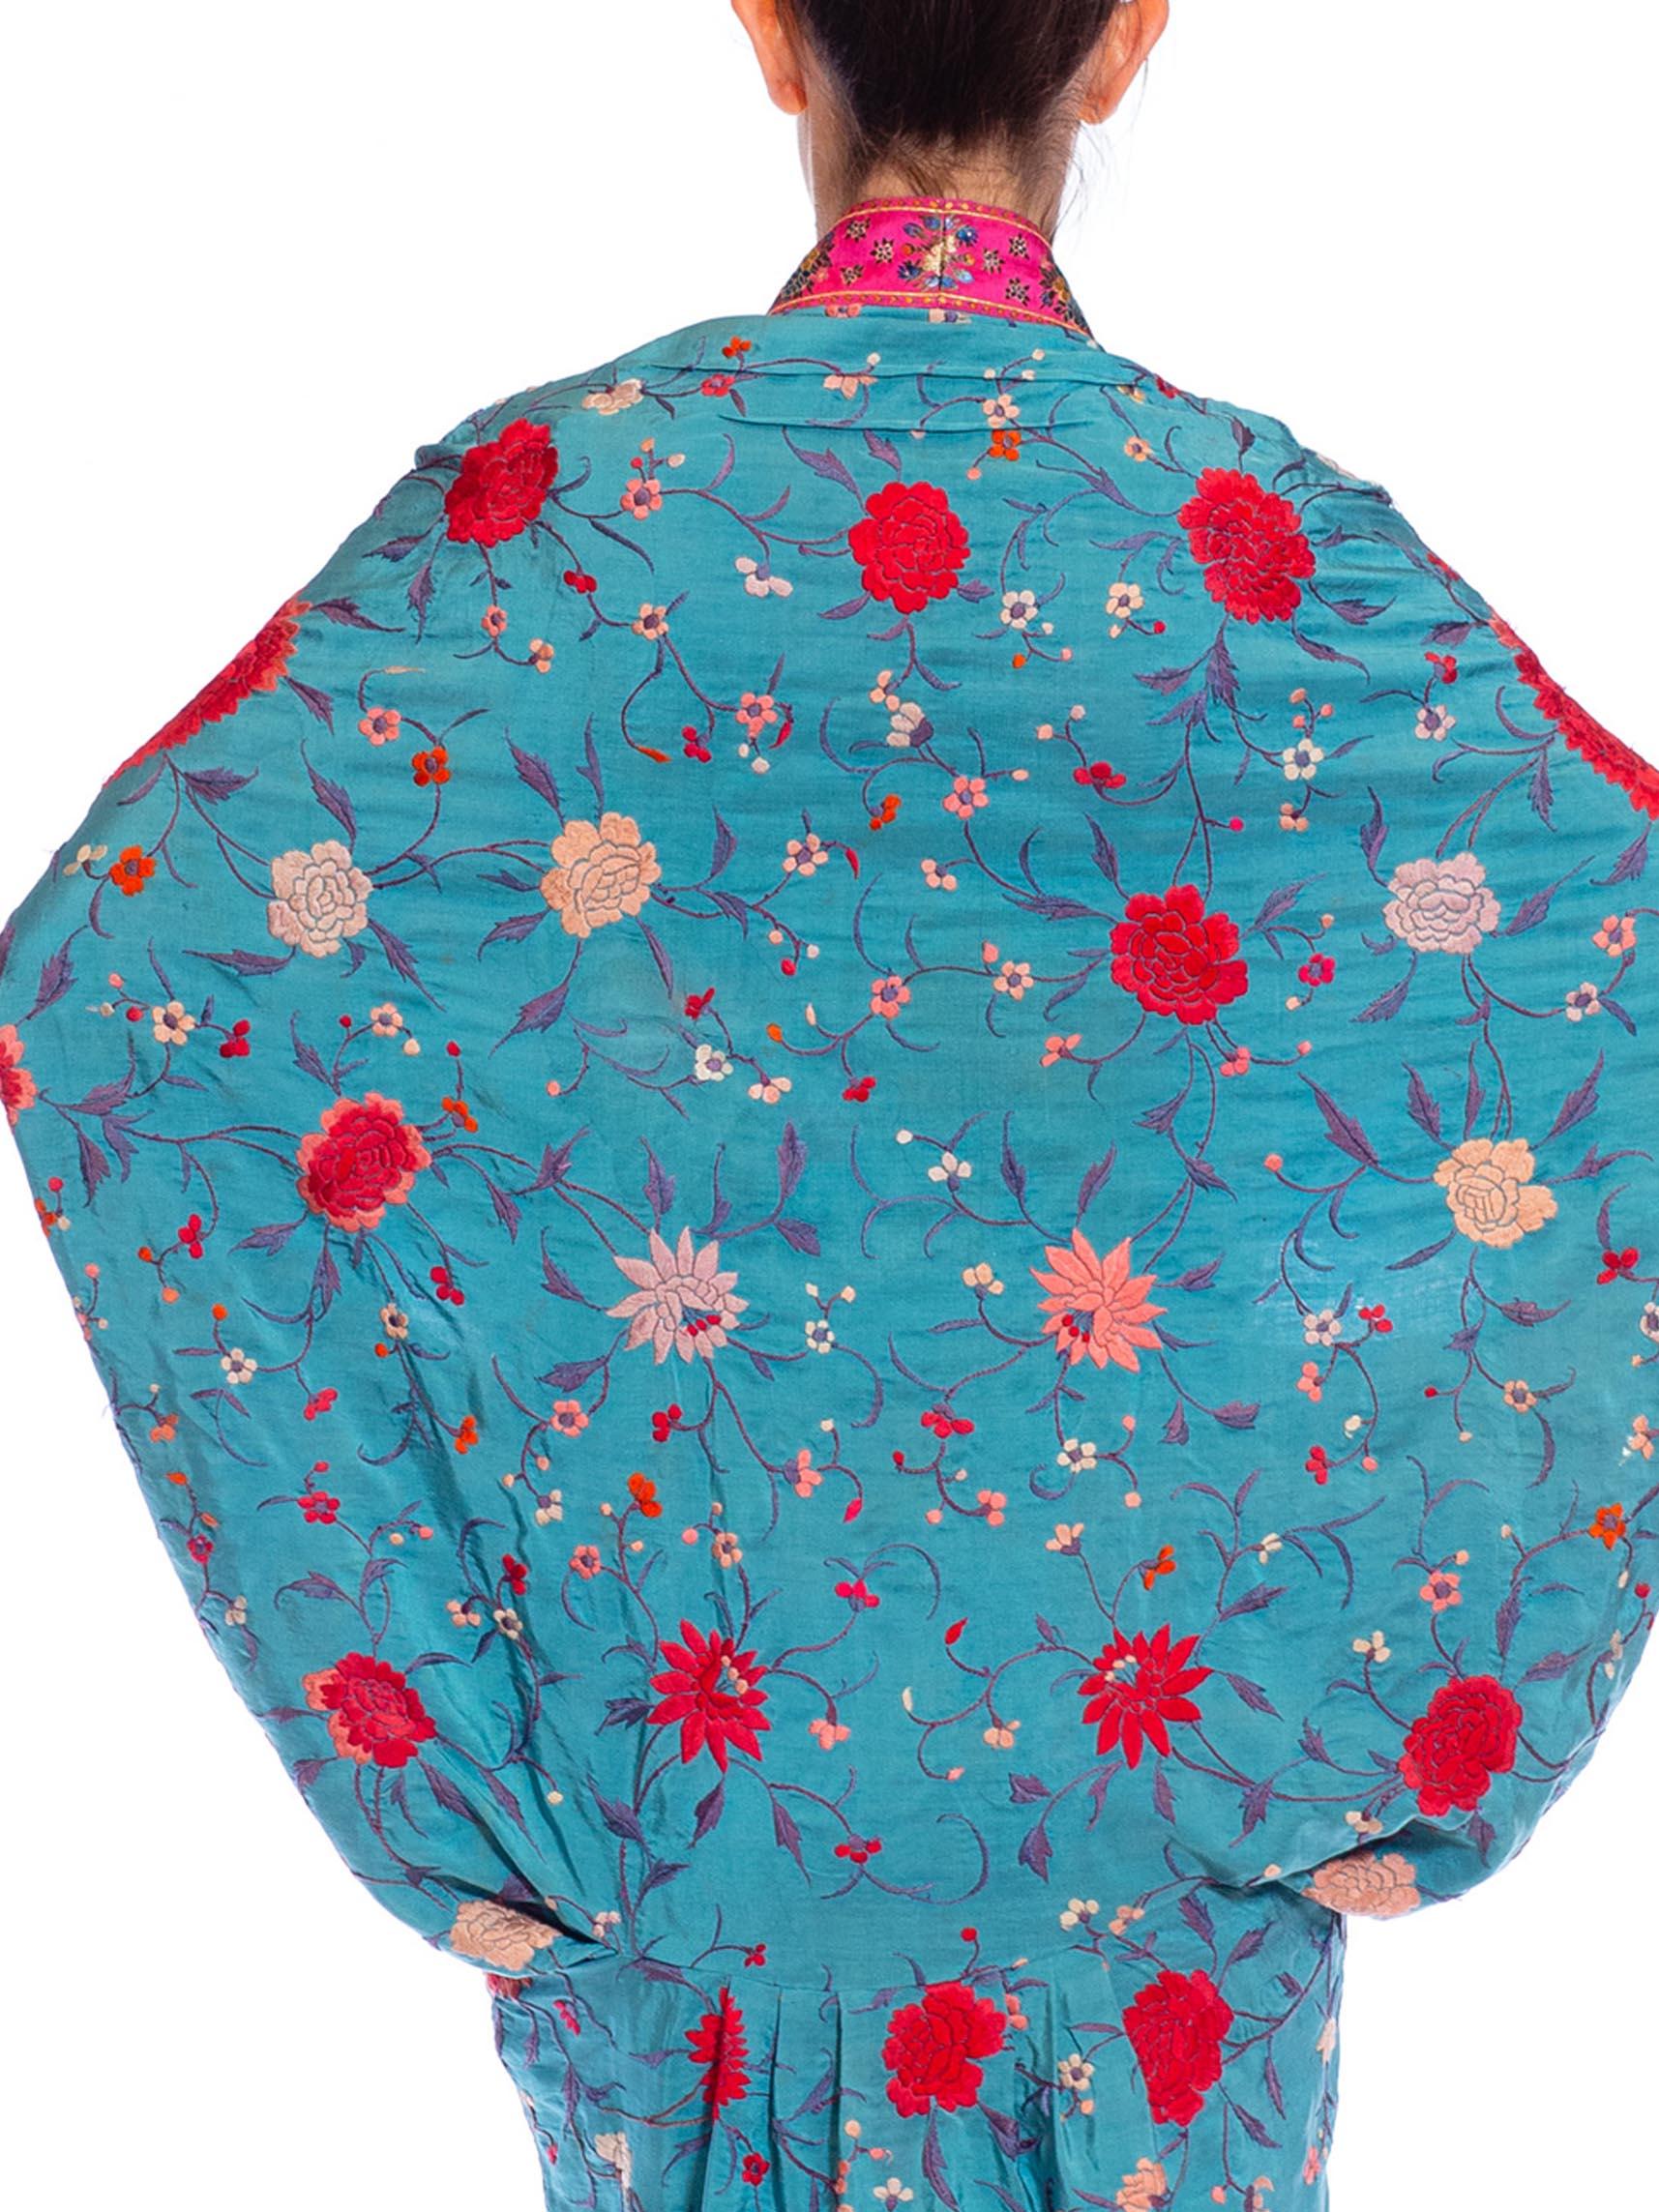 MORPHEW COLLECTION Aqua Blue & Pink Silk Embroidered Floral Cocoon With Fringe  For Sale 4